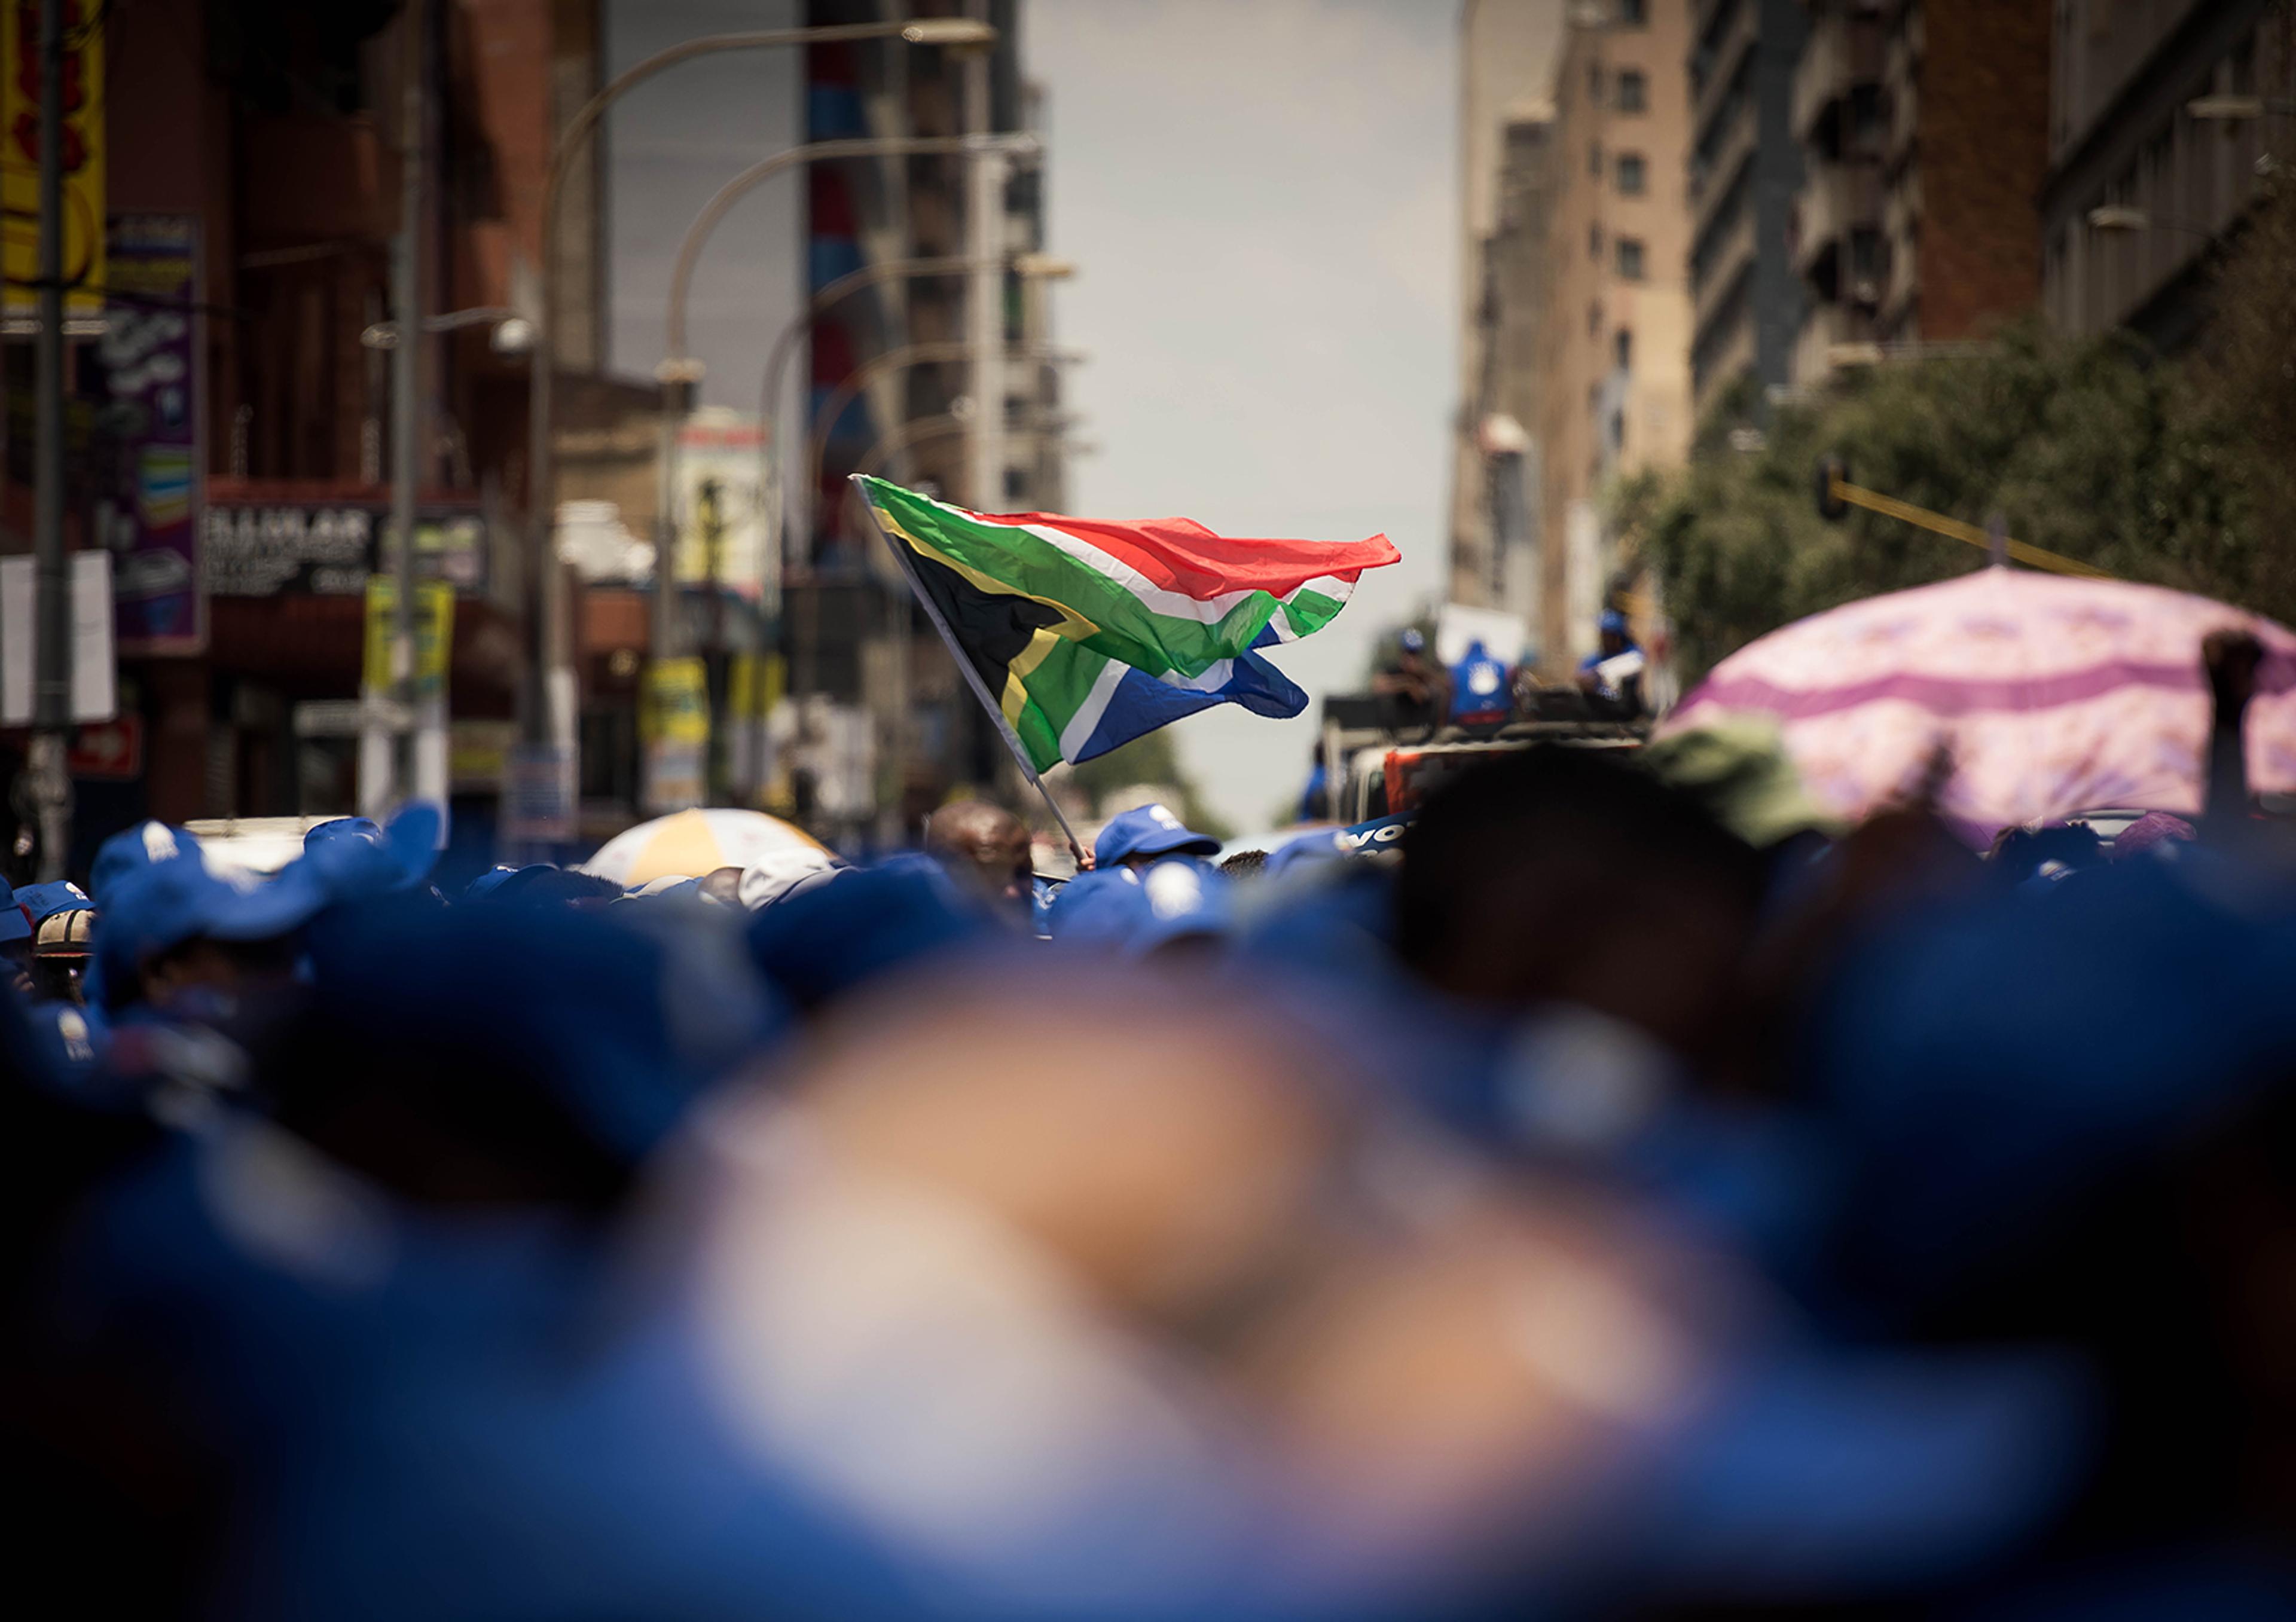 a person is holding a south african flag in a crowd of people .